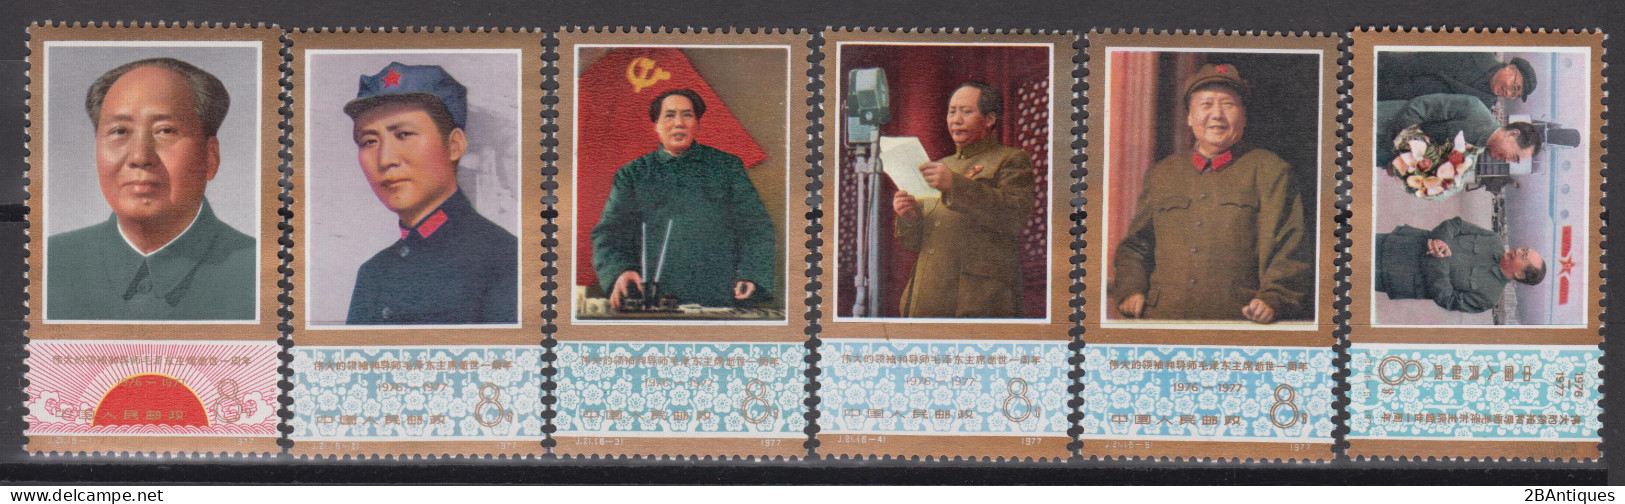 PR CHINA 1977 - The 1st Anniversary Of The Death Of Mao Tse-tung  MNH** OG - Ungebraucht